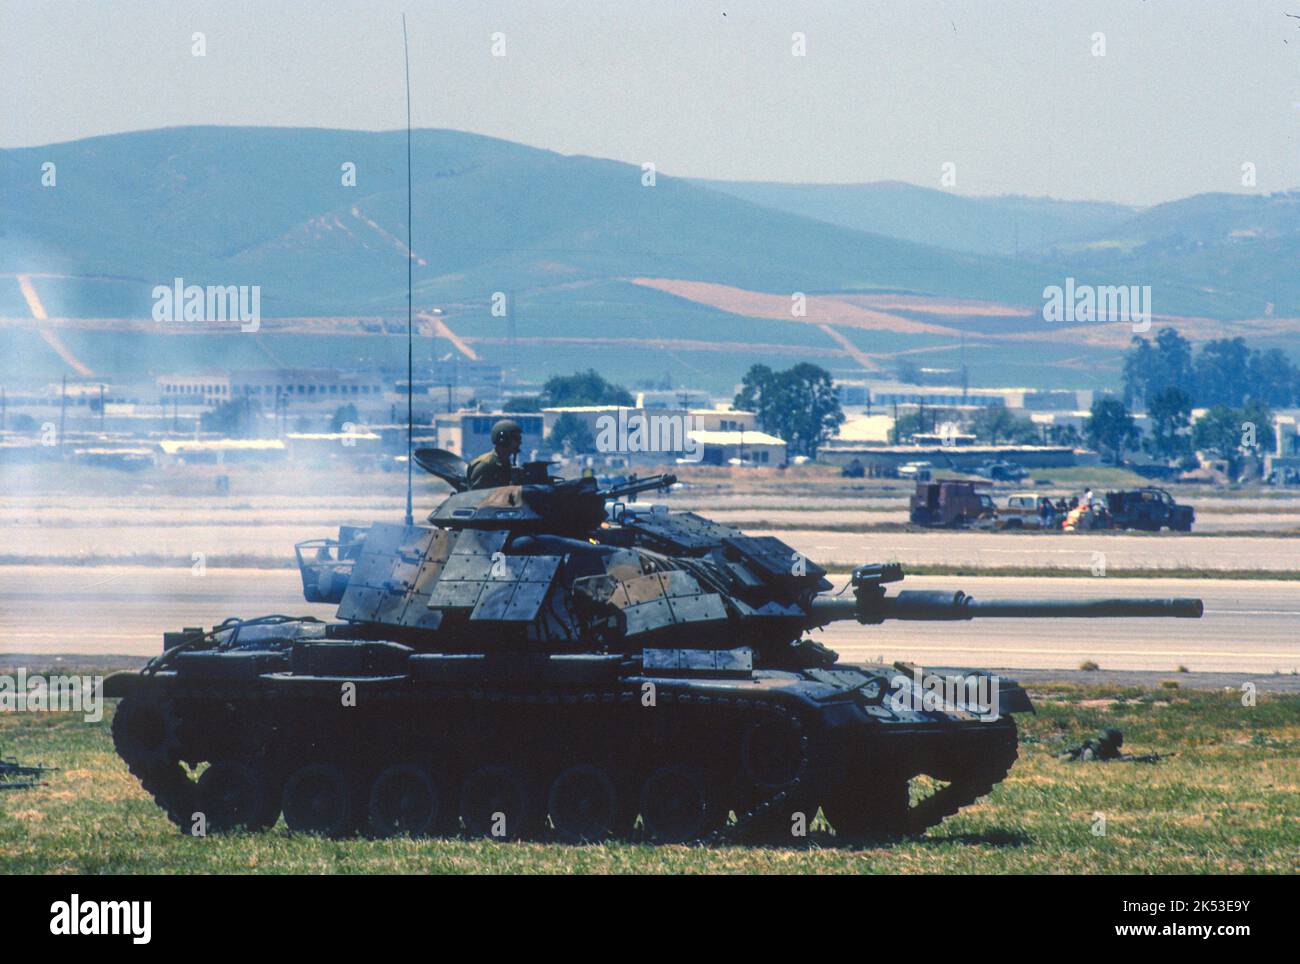 USMC Battle Tank moves on airfield during a MAGTF demonstration at MCAS El Toro, California Stock Photo